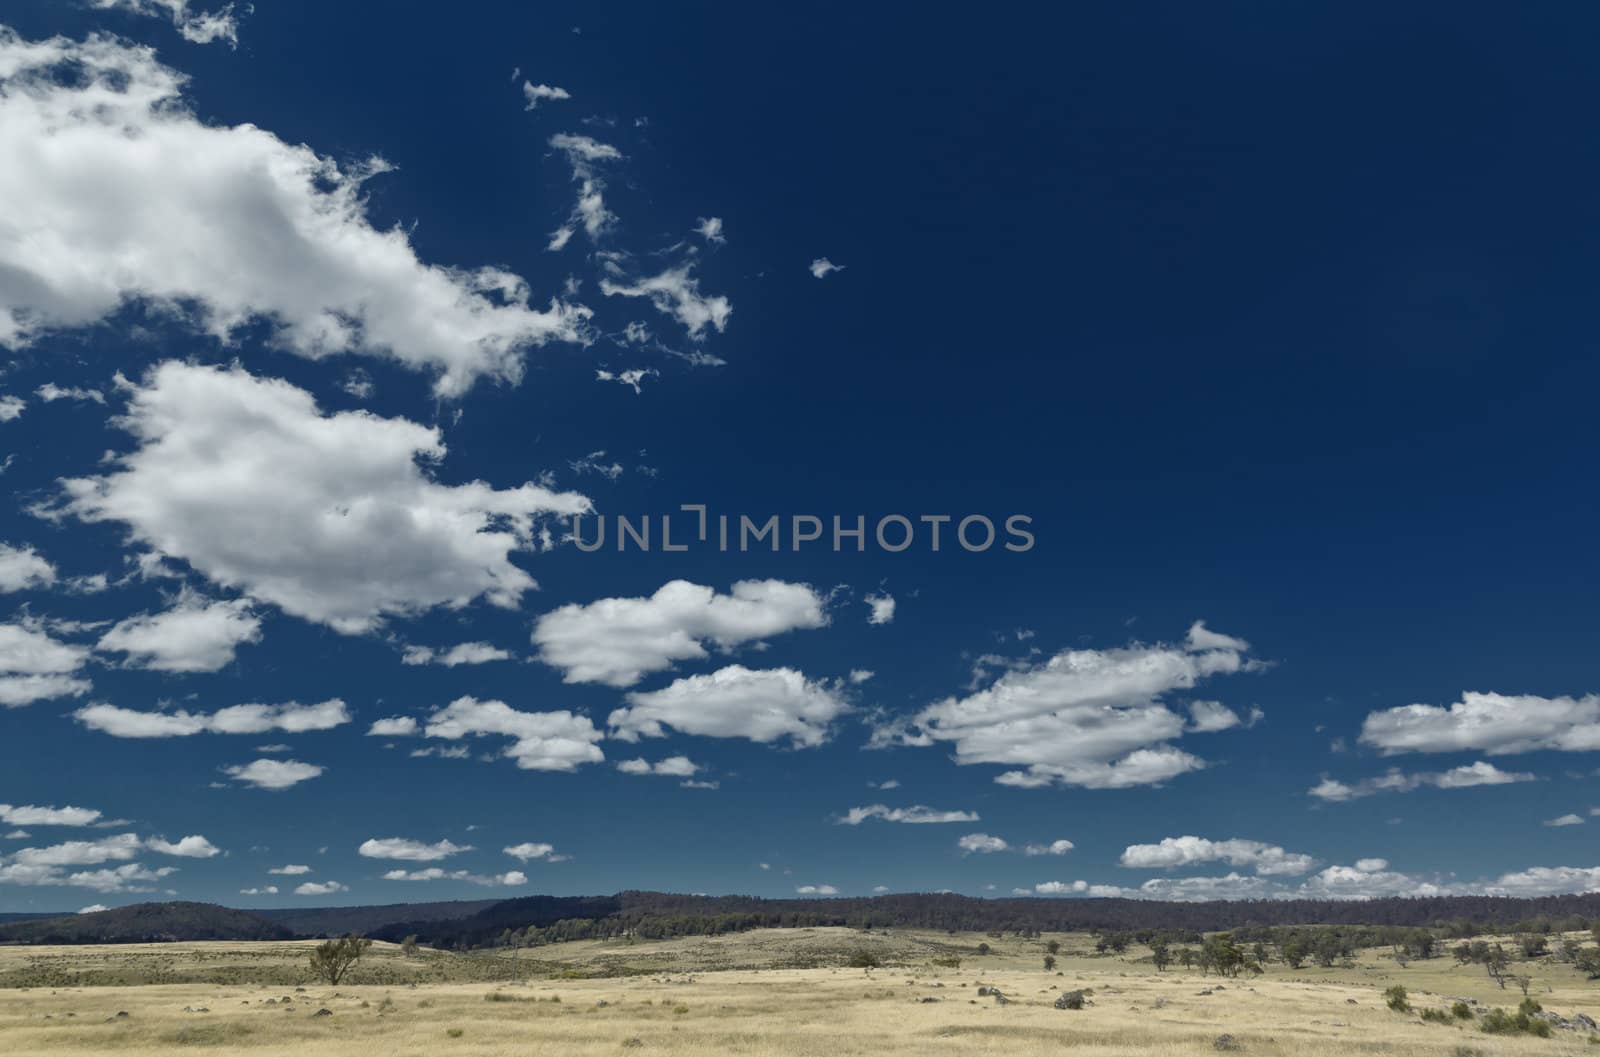 An image of a dry landscape in Australia